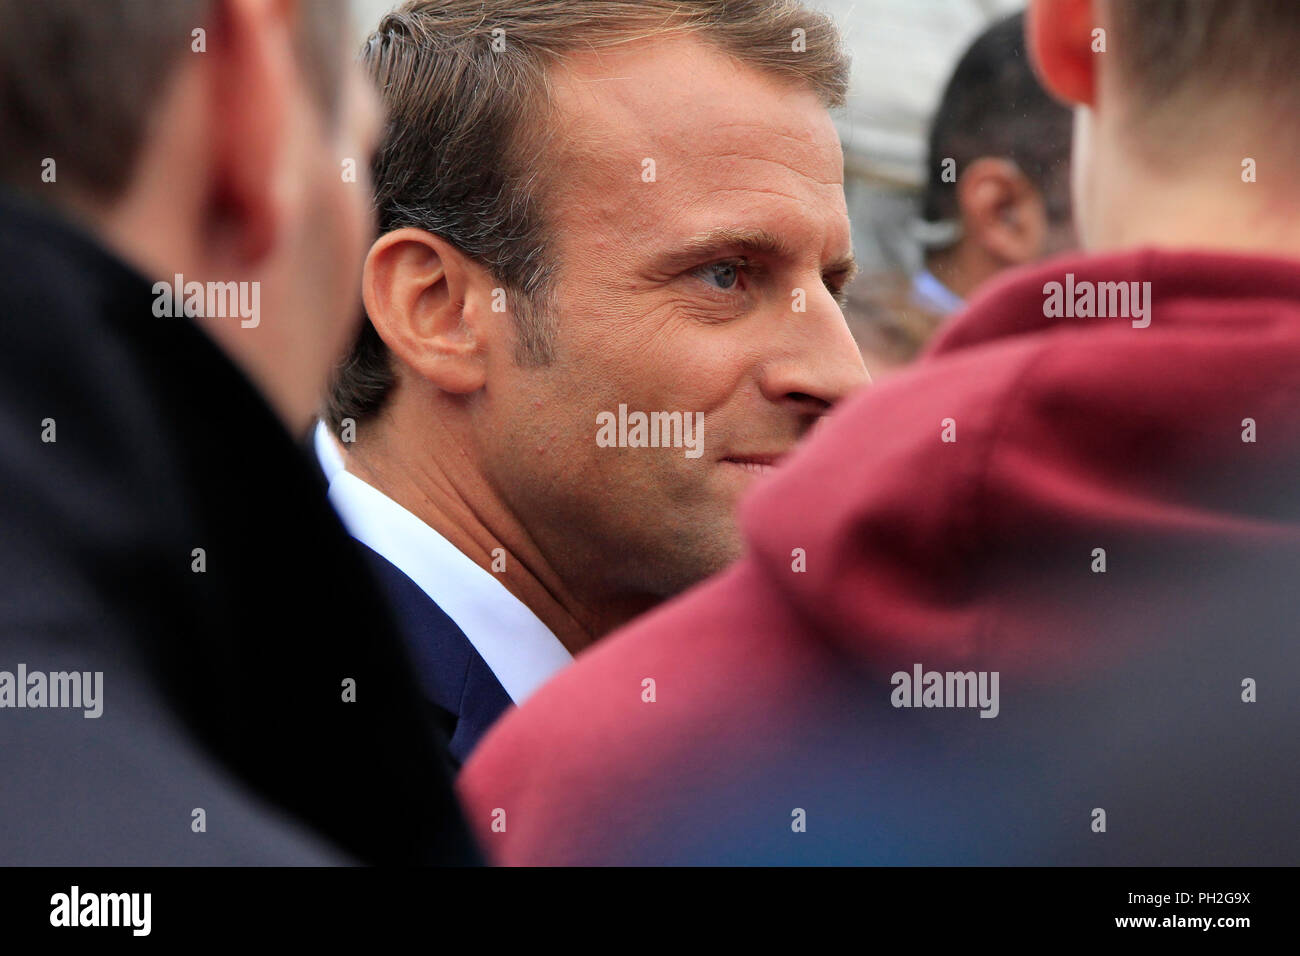 Helsinki, Finland. August 30, 2018. French President Emmanuel Macron greets people on Market Square. President Macron and his wife Brigitte Macron (not in picture) are in Finland on a two-day official visit. Credit: Taina Sohlman/Alamy Live News Stock Photo